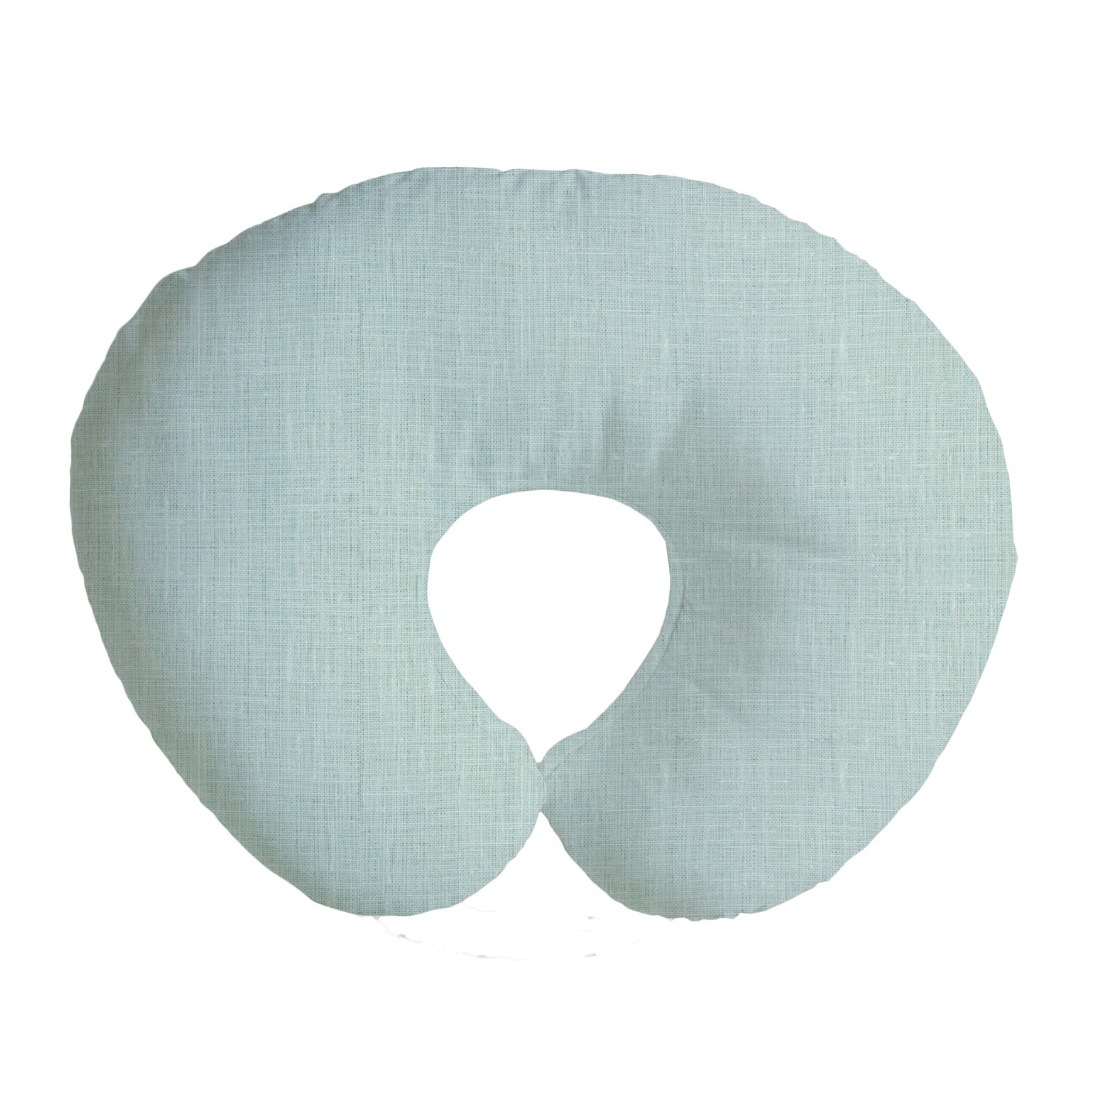 nursing pillow cover blue grey linen from madly wish